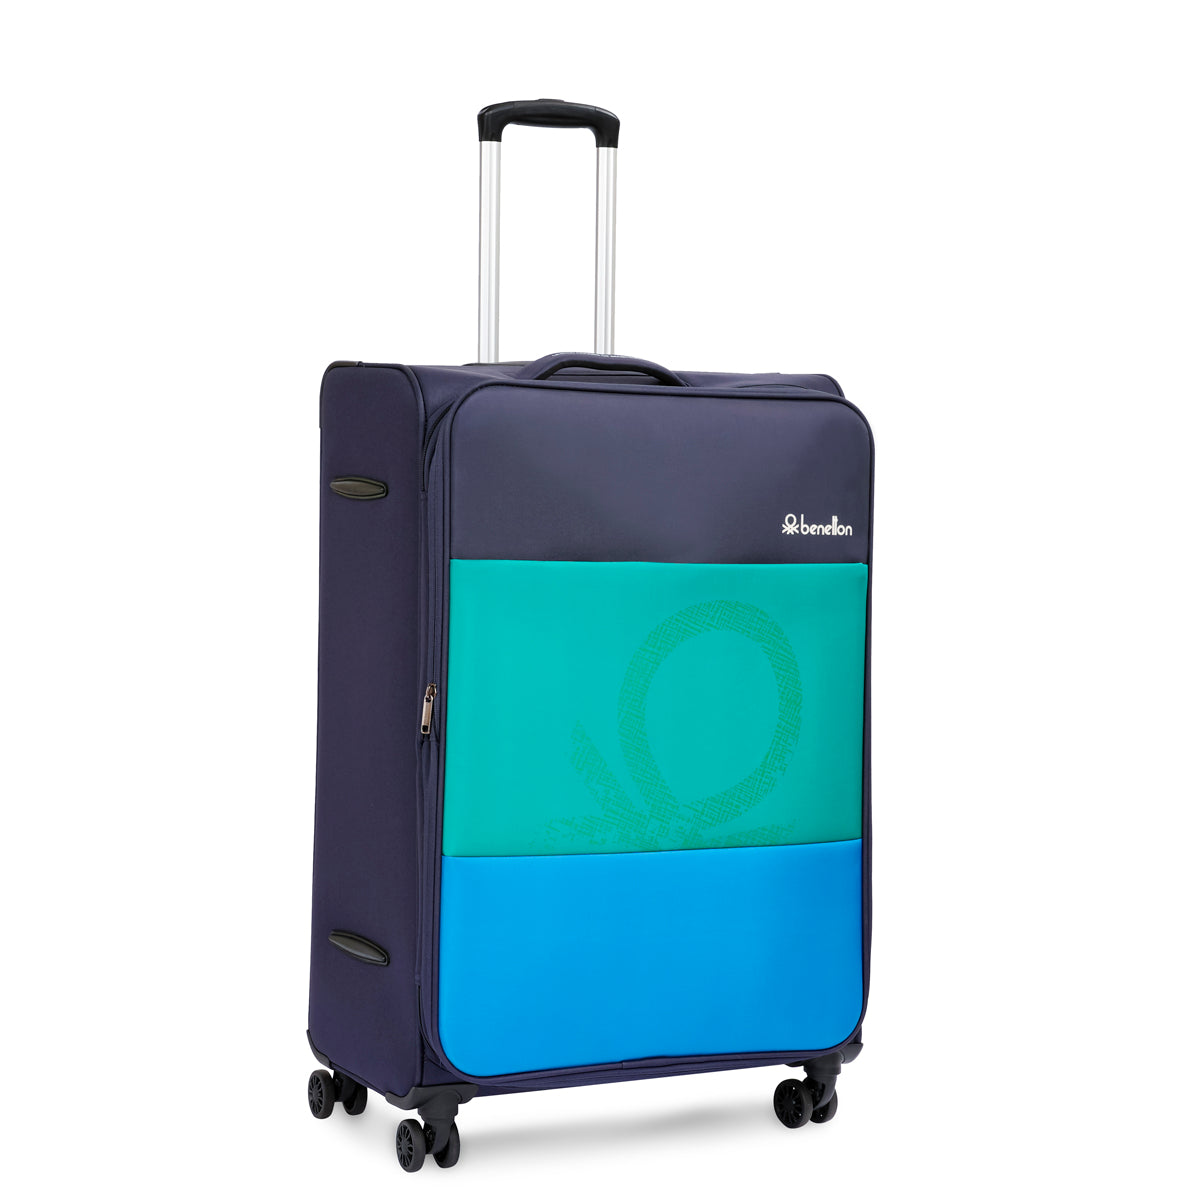 United Colors of Benetton Archimedes Soft Luggage Green Cargo